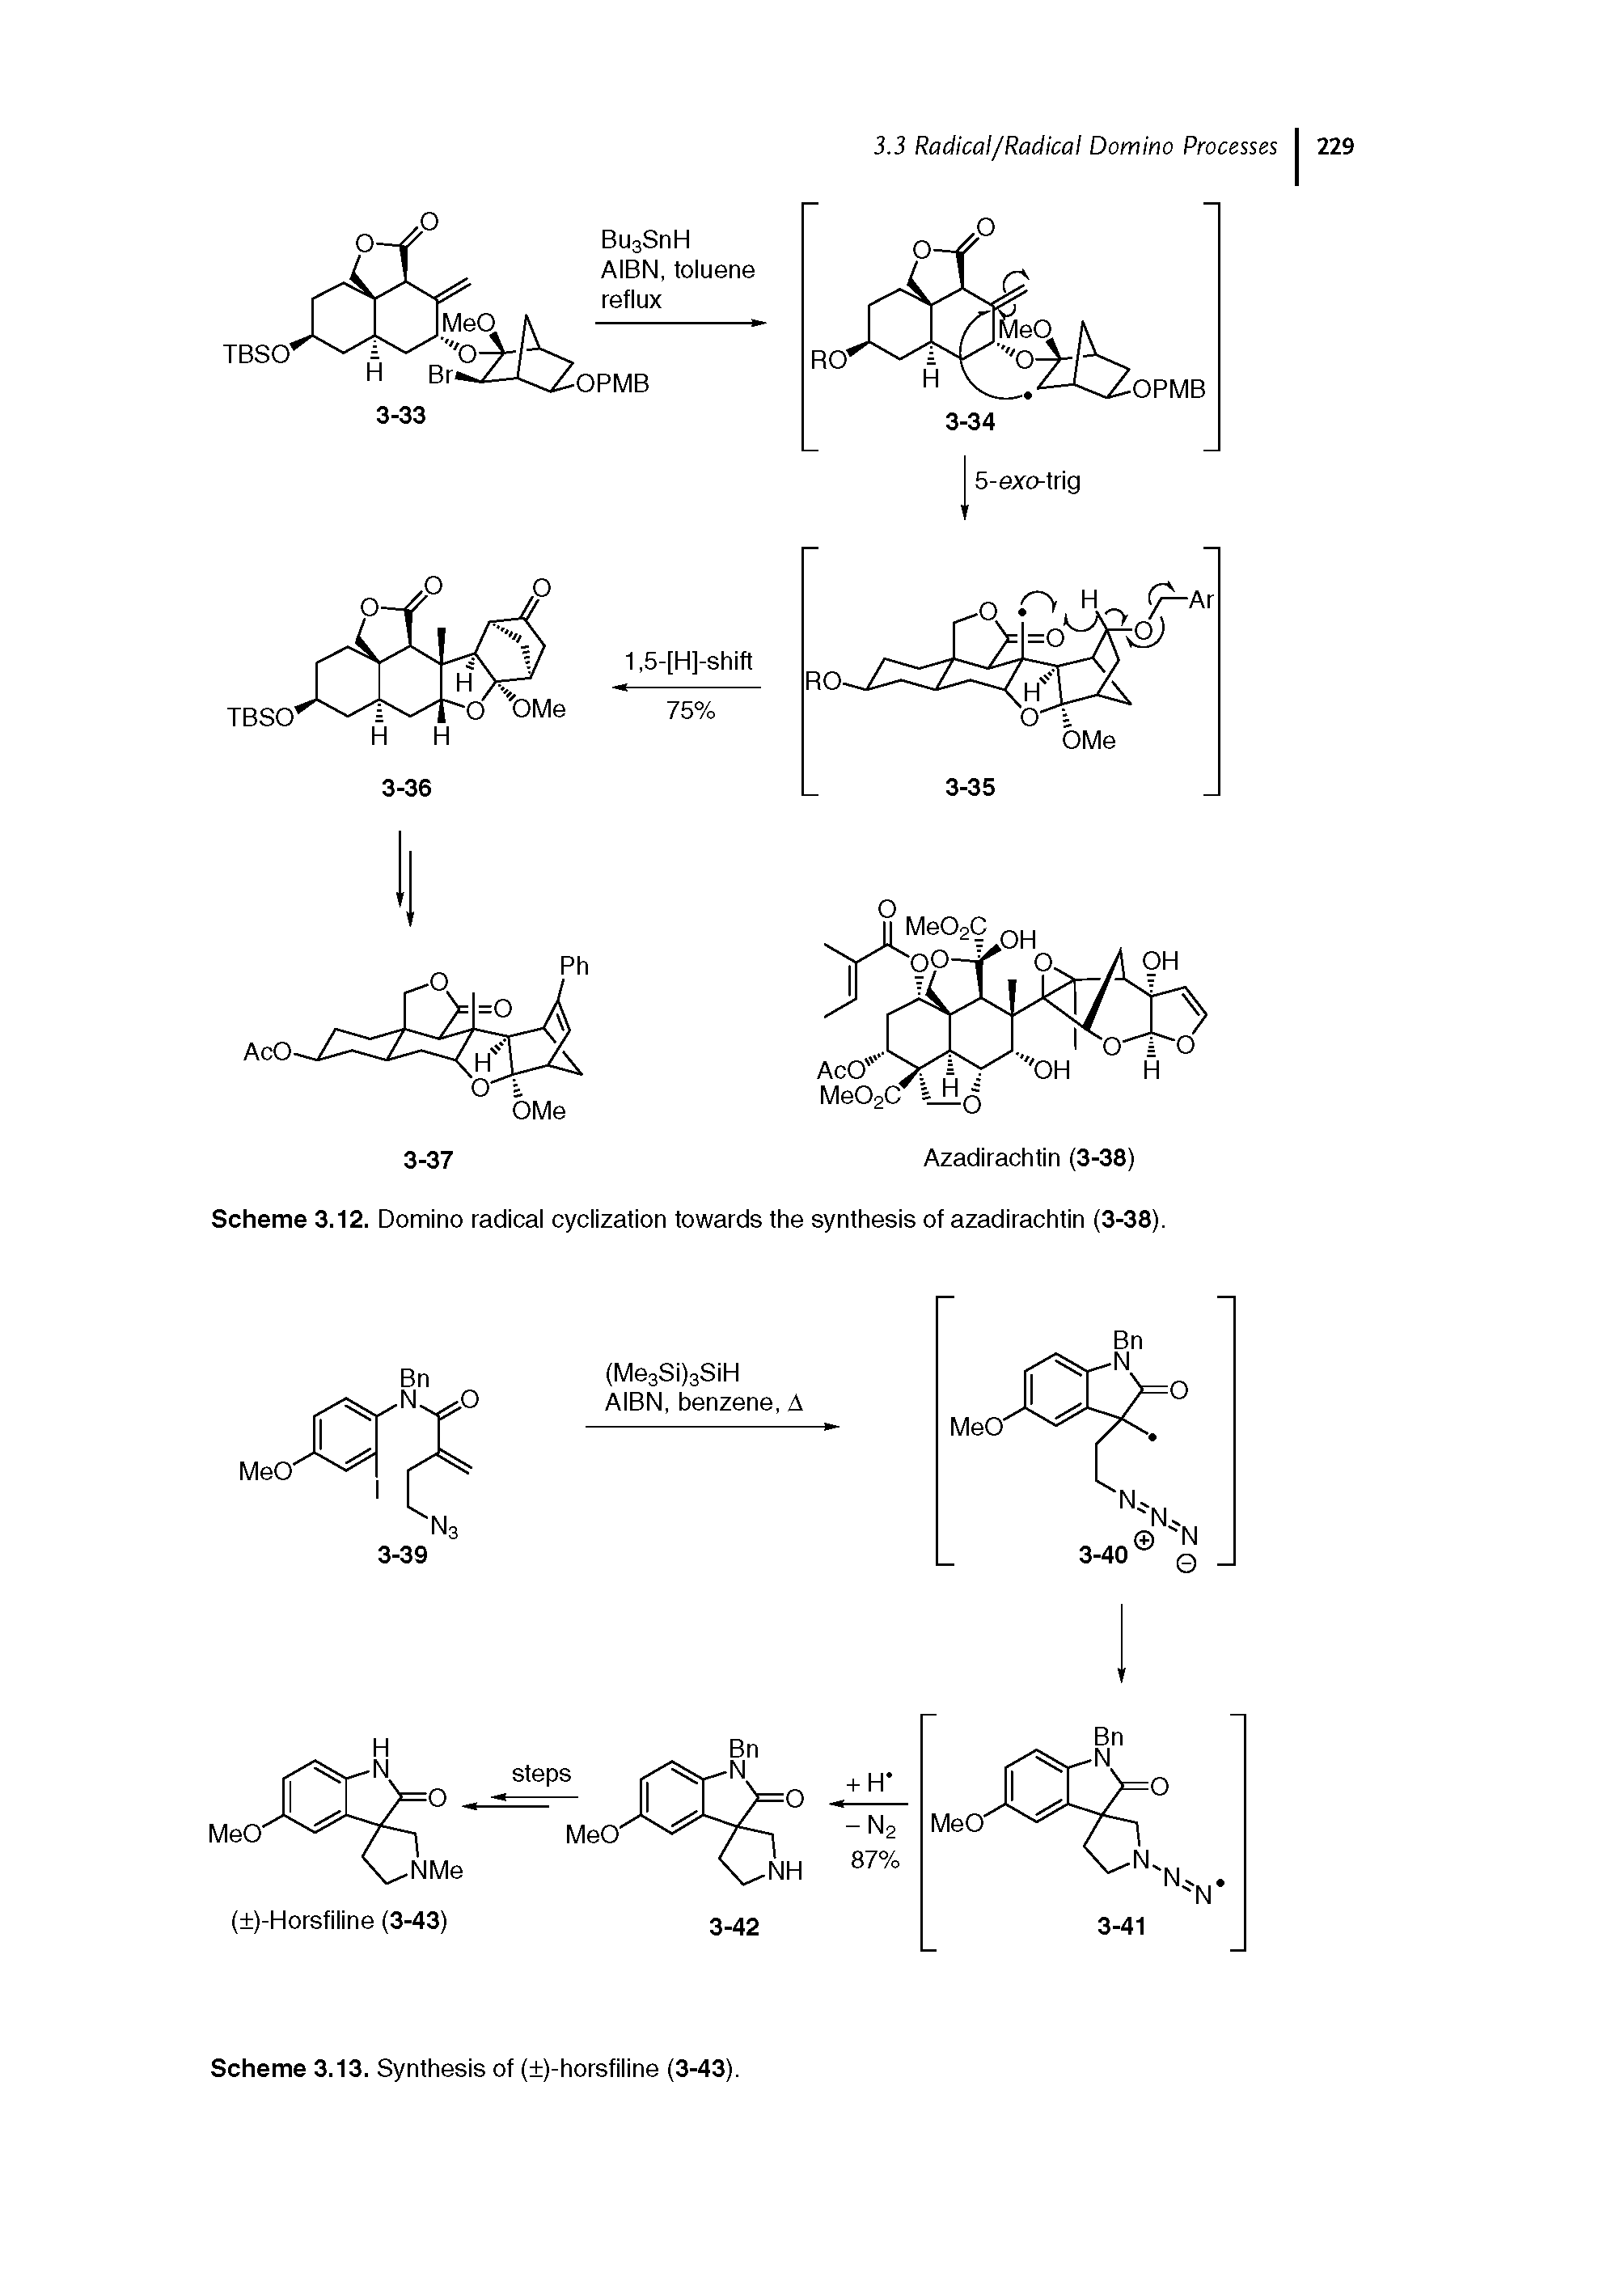 Scheme 3.12. Domino radical cyclization towards the synthesis of azadirachtin (3-38).